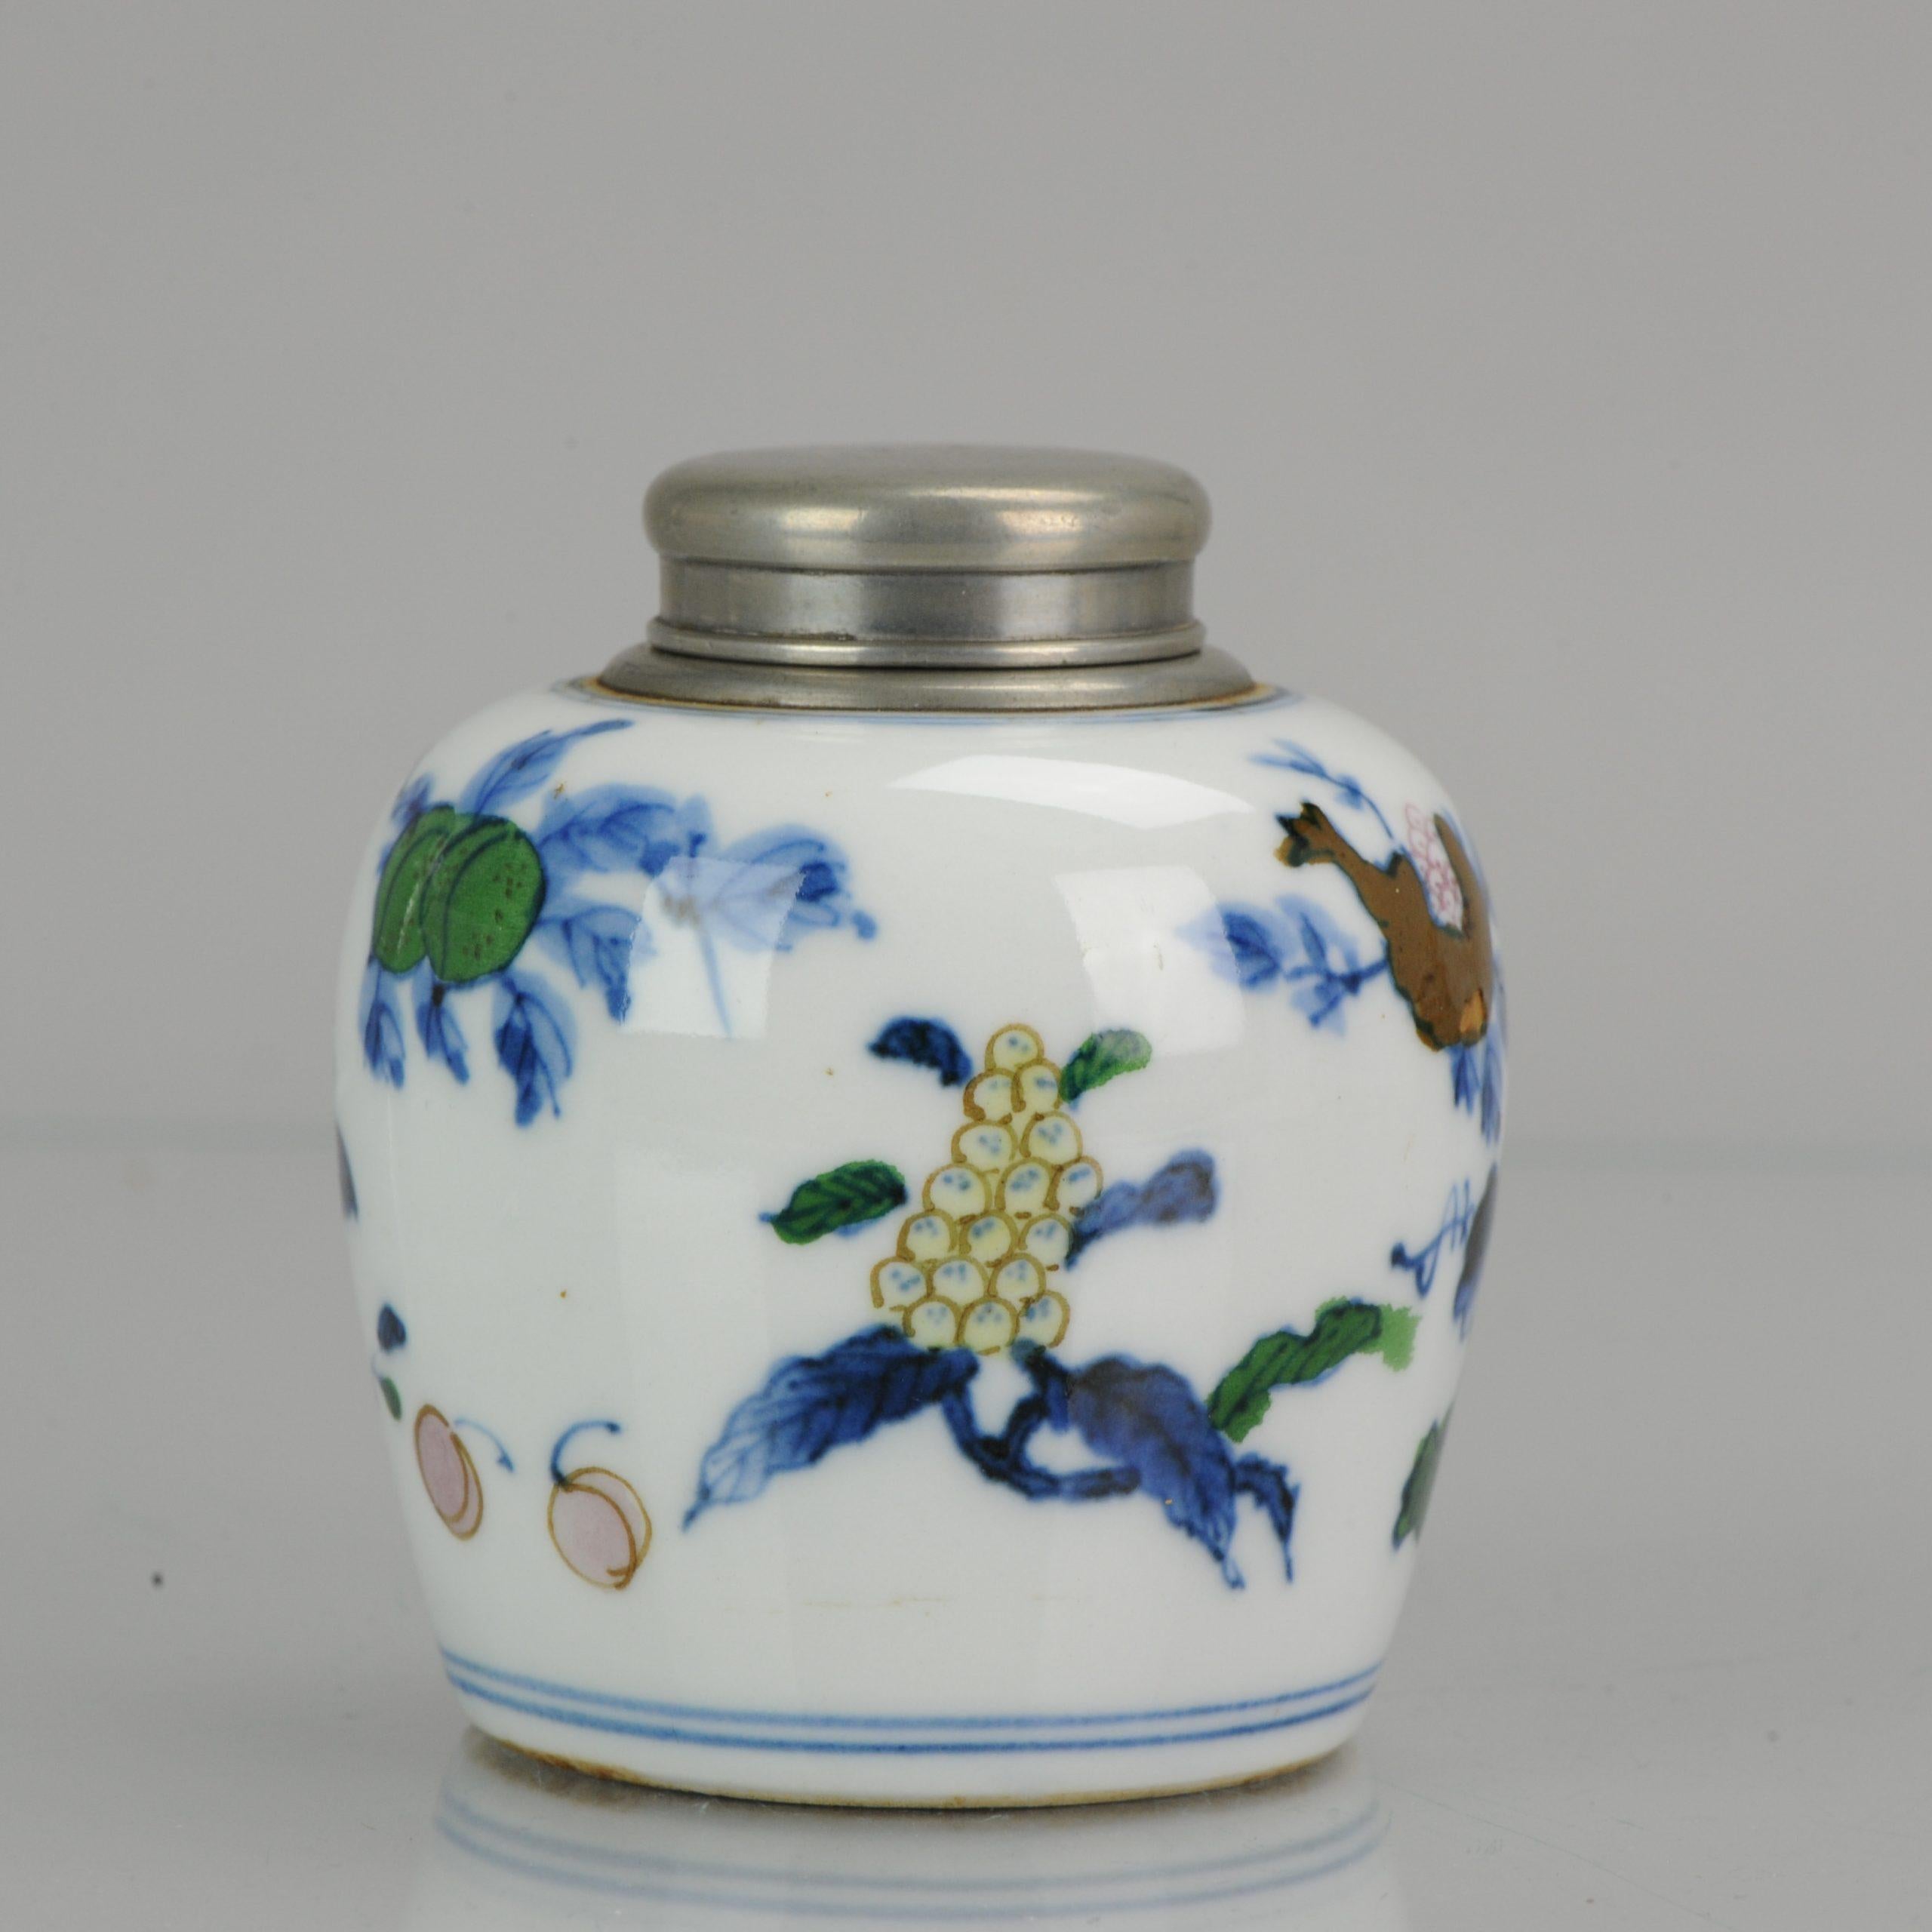 Qing Antique 19th Century Porcelain Doucai Tea Caddy Marked Fruit Decoration Chinese